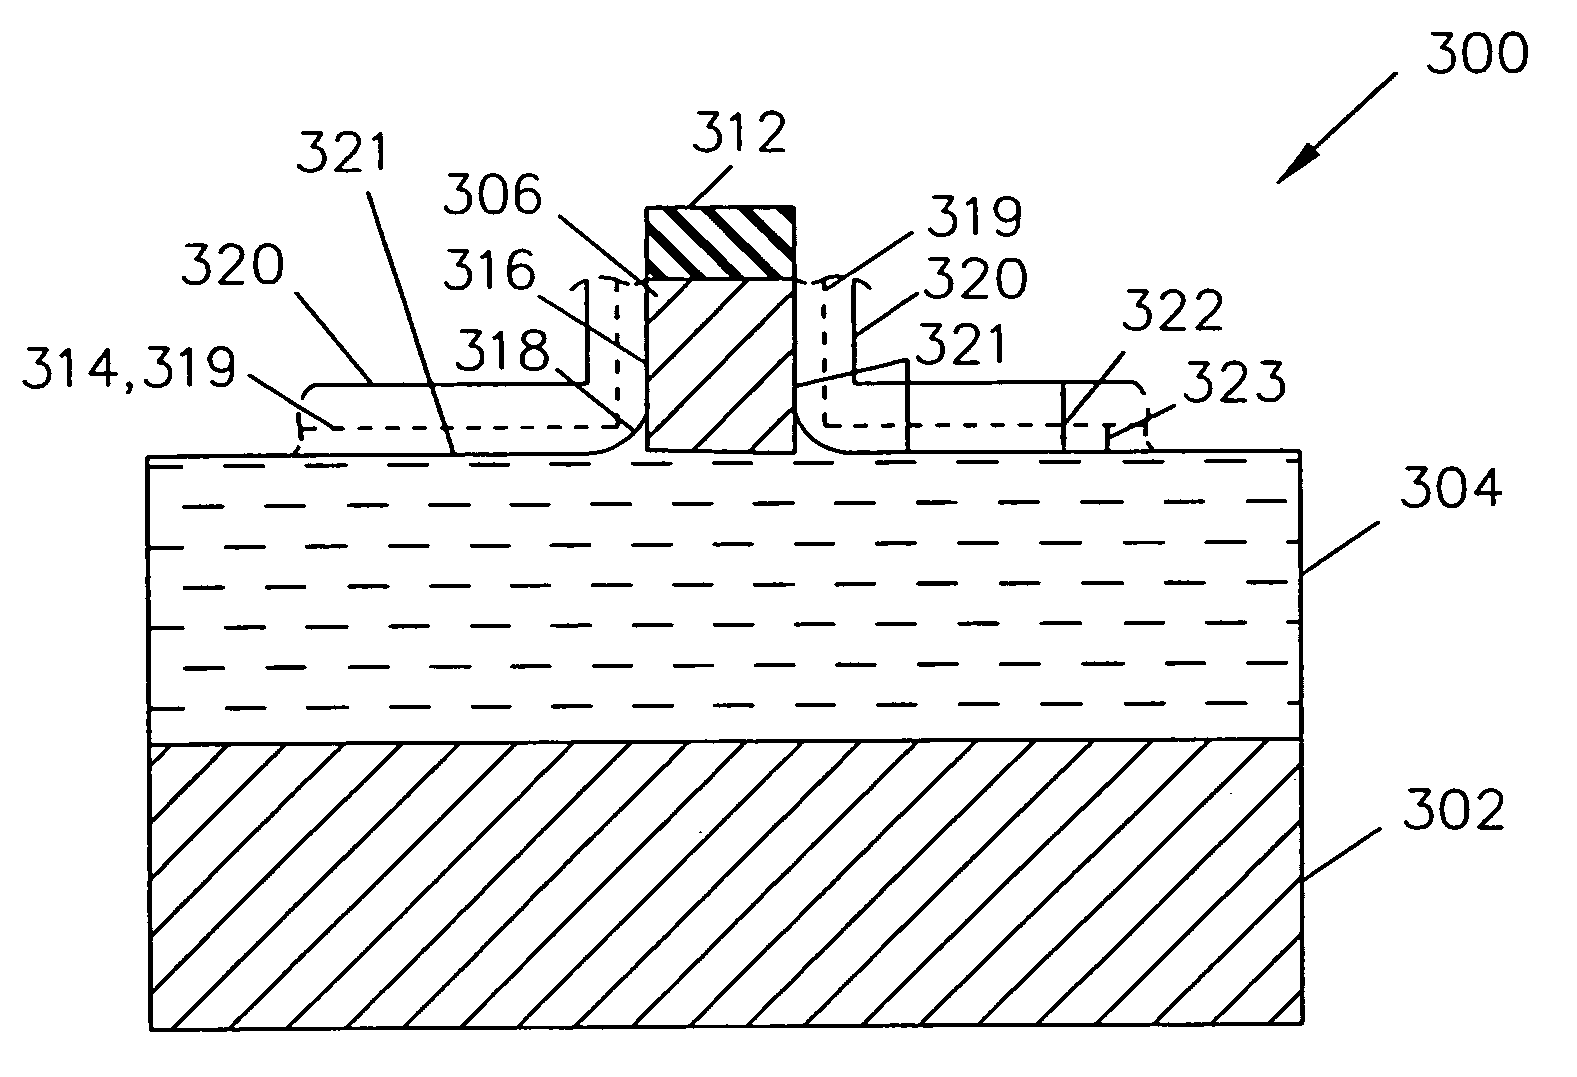 Structure and method to fabricate finfet devices